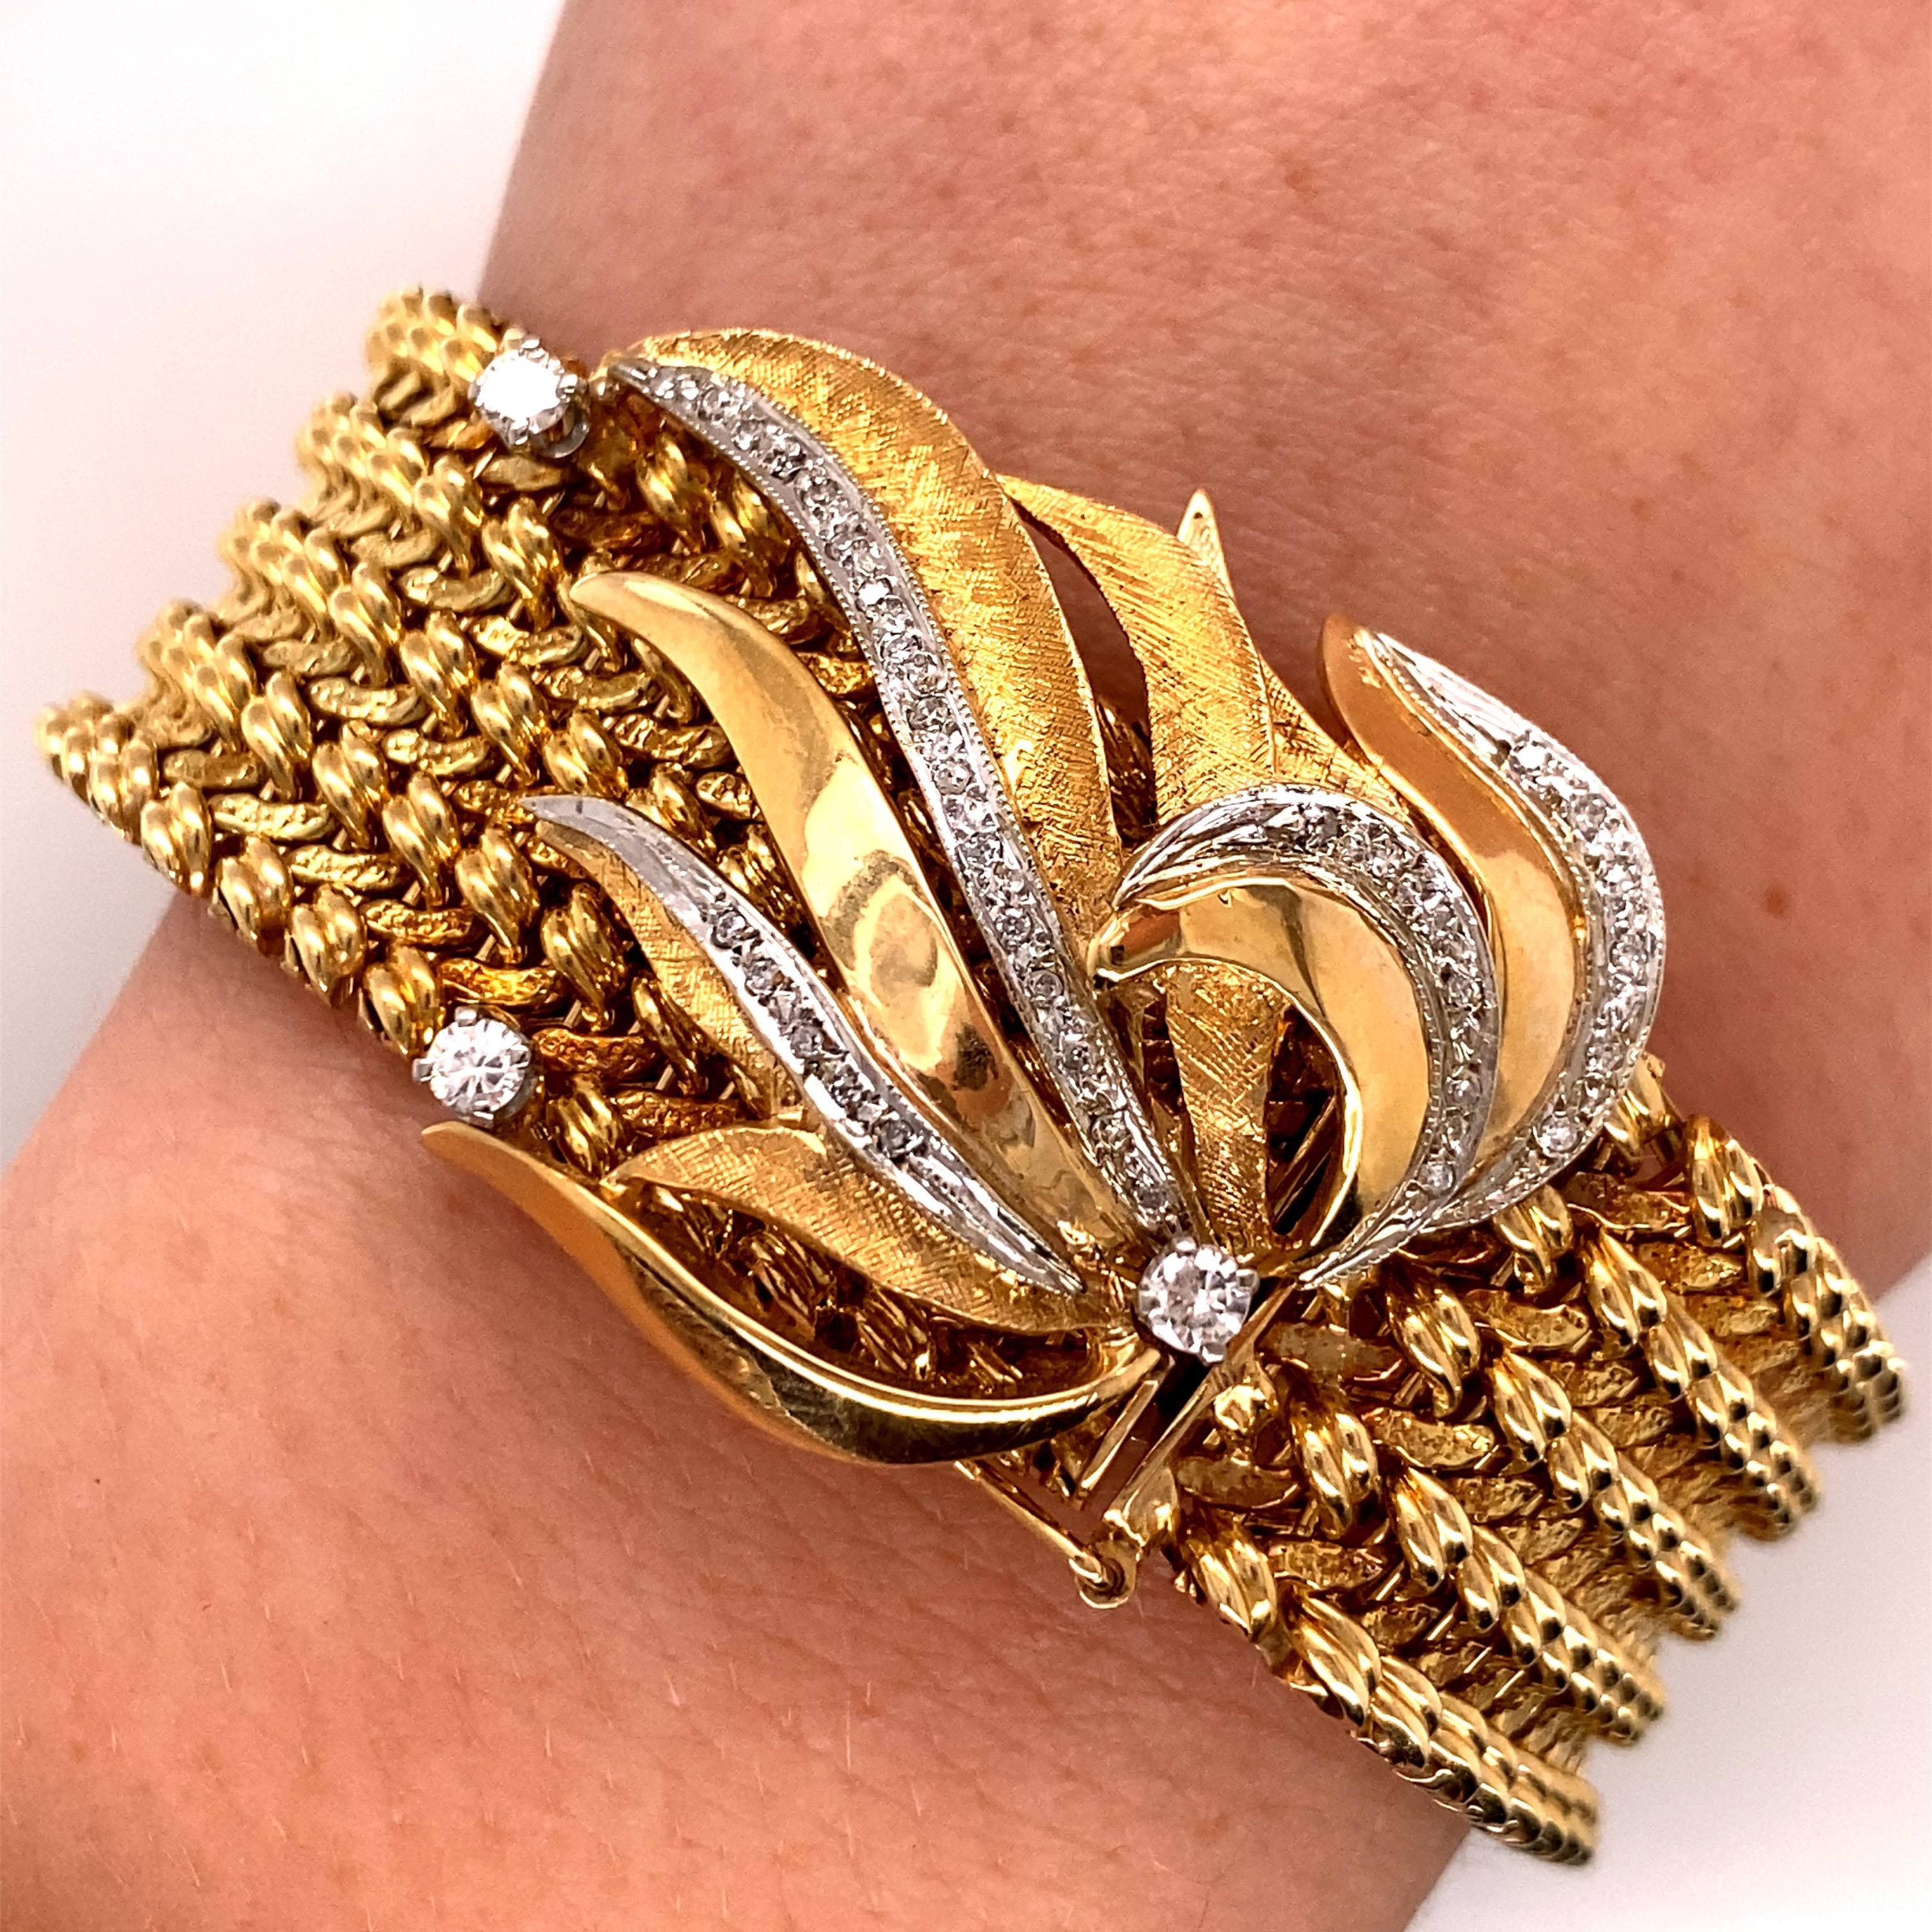 Vintage 1960s 14 Karat Gold Wide Woven Link Bracelet with Diamond Leaf Clasp In Excellent Condition For Sale In Boston, MA